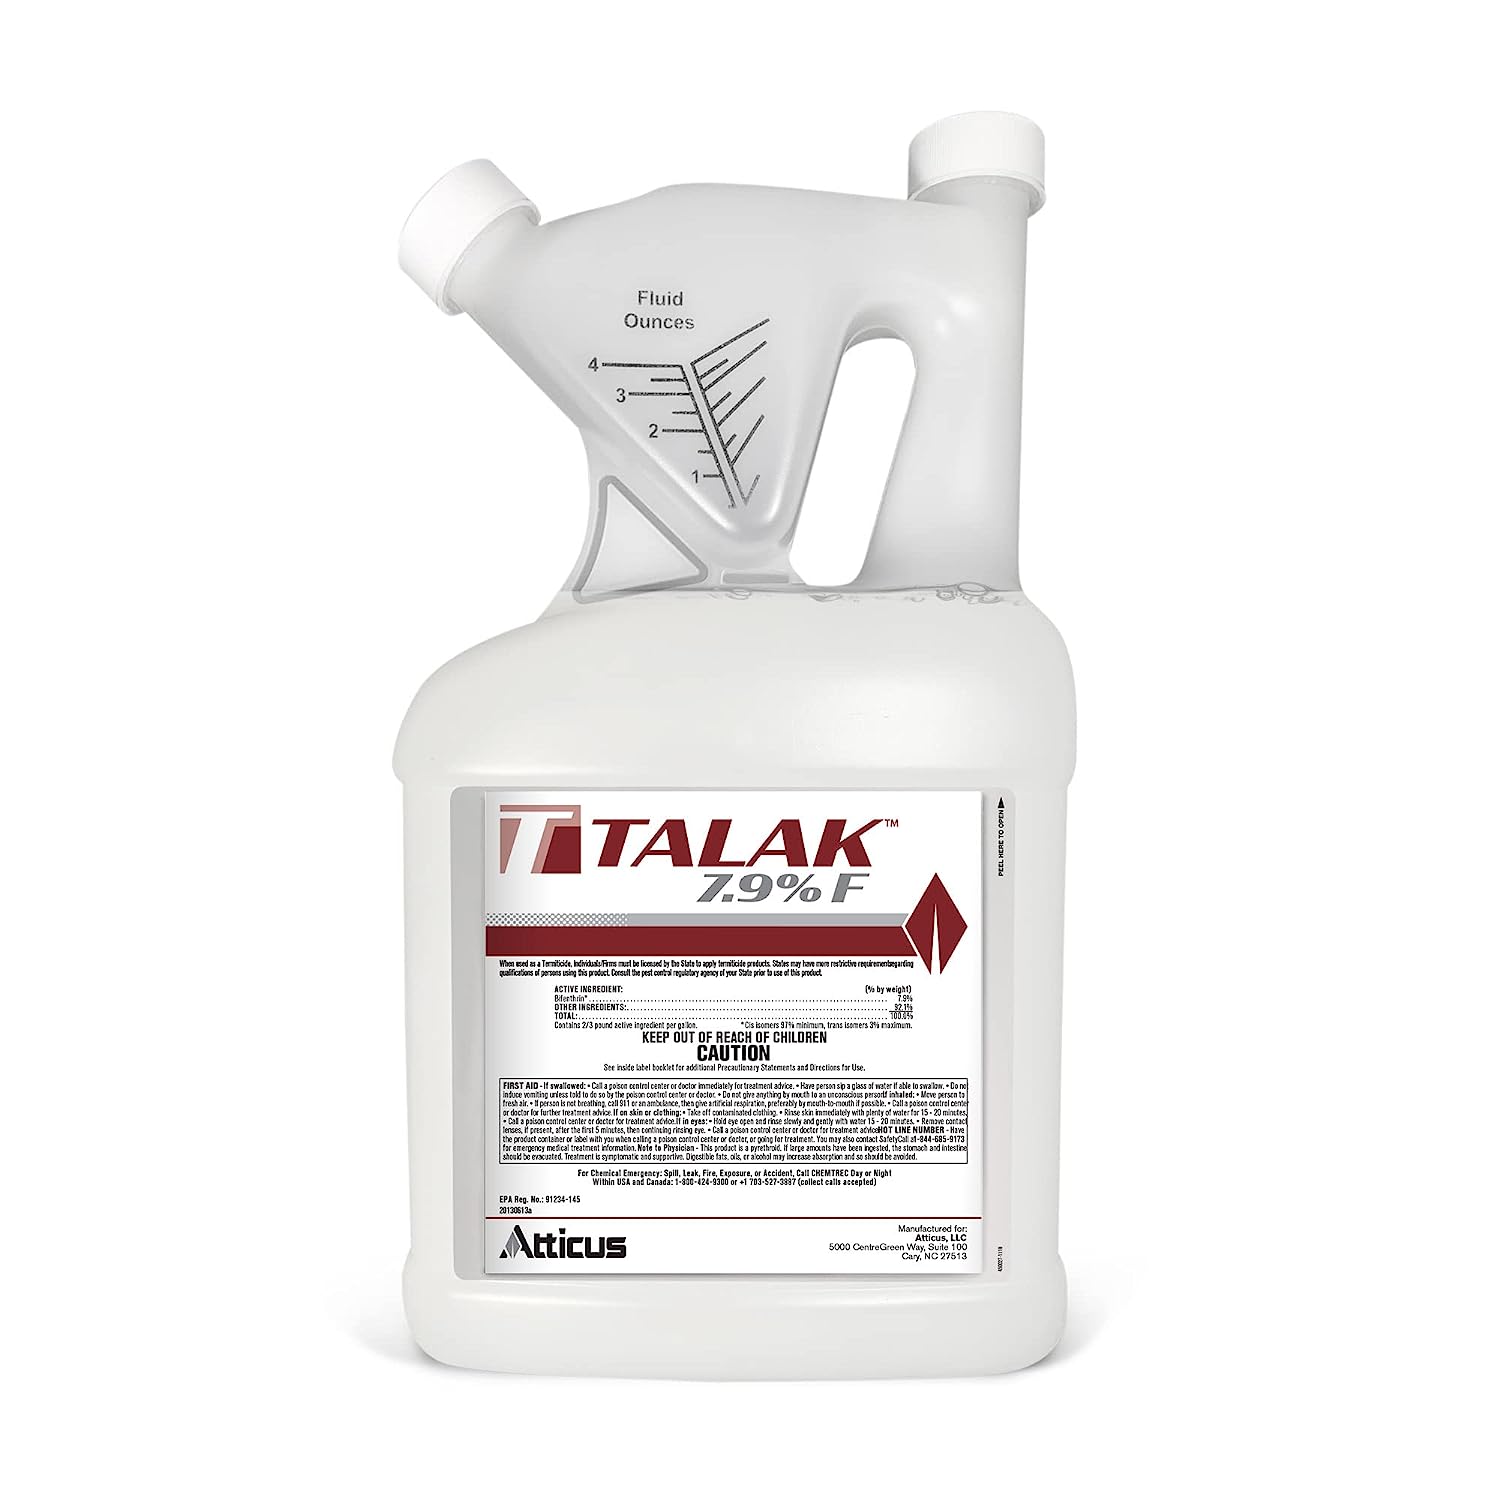 Talak 7.9 F Bifenthrin Insecticide Concentrate (1 [...]